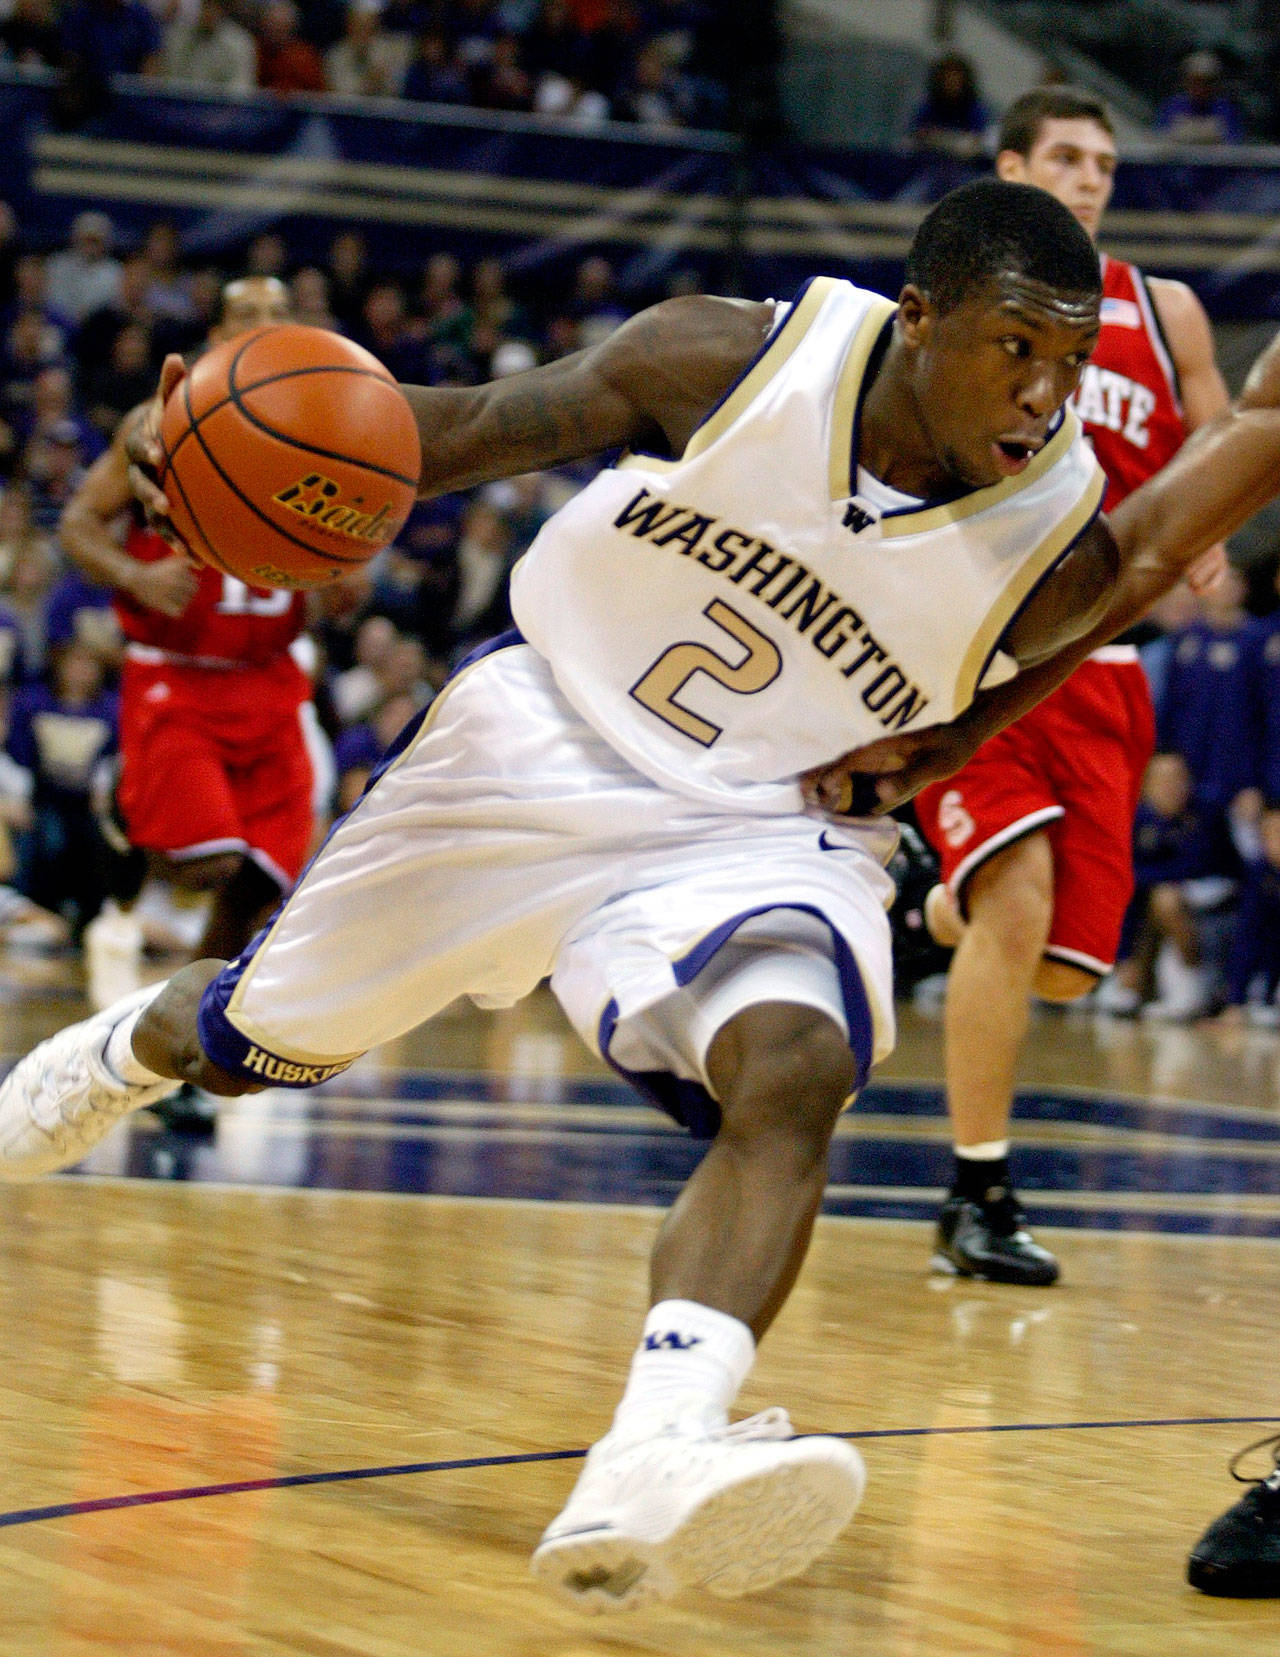 Nate Robinson says he was offered $100,000 a year from UW booster